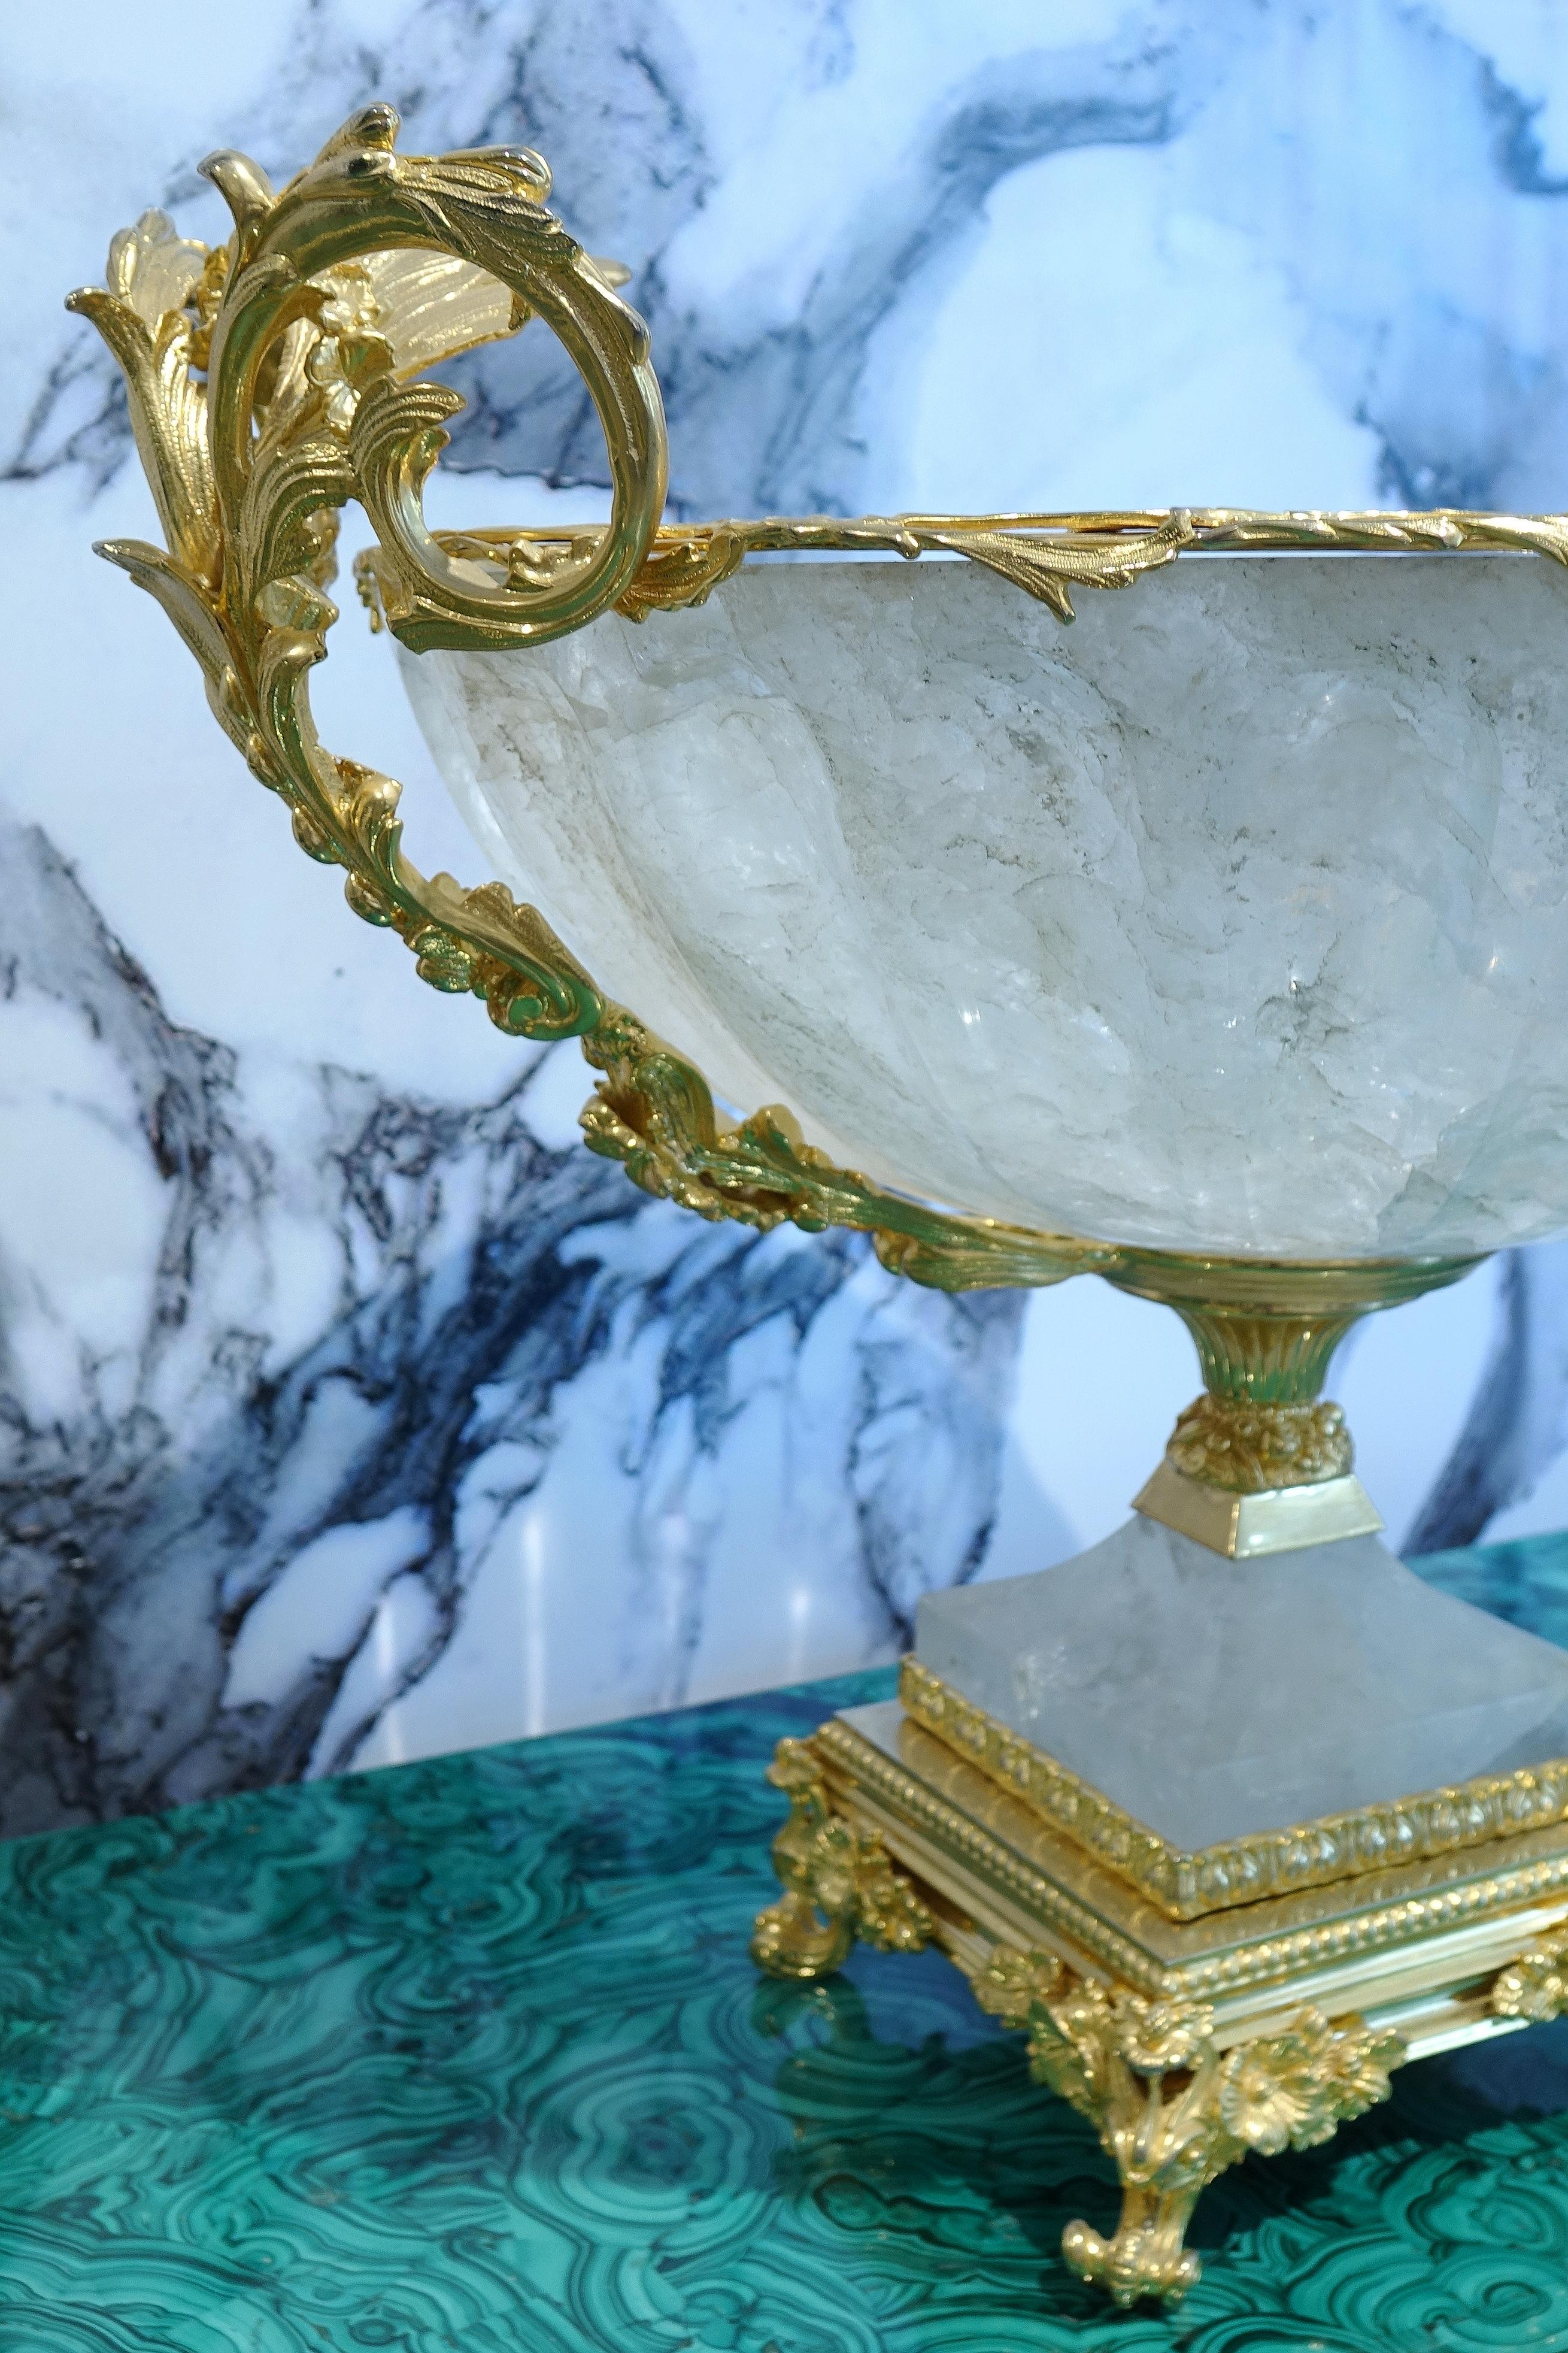 Gilt bronze cup and rock crystal
Made by the Tosco-Ticciati company.
Unique piece in perfect condition
Measurements: 70 x 48 height 35cm.

Tosco Ticciati, a long tradition of wisdom and artisanal heritage.

Born in the early 1970s, as an